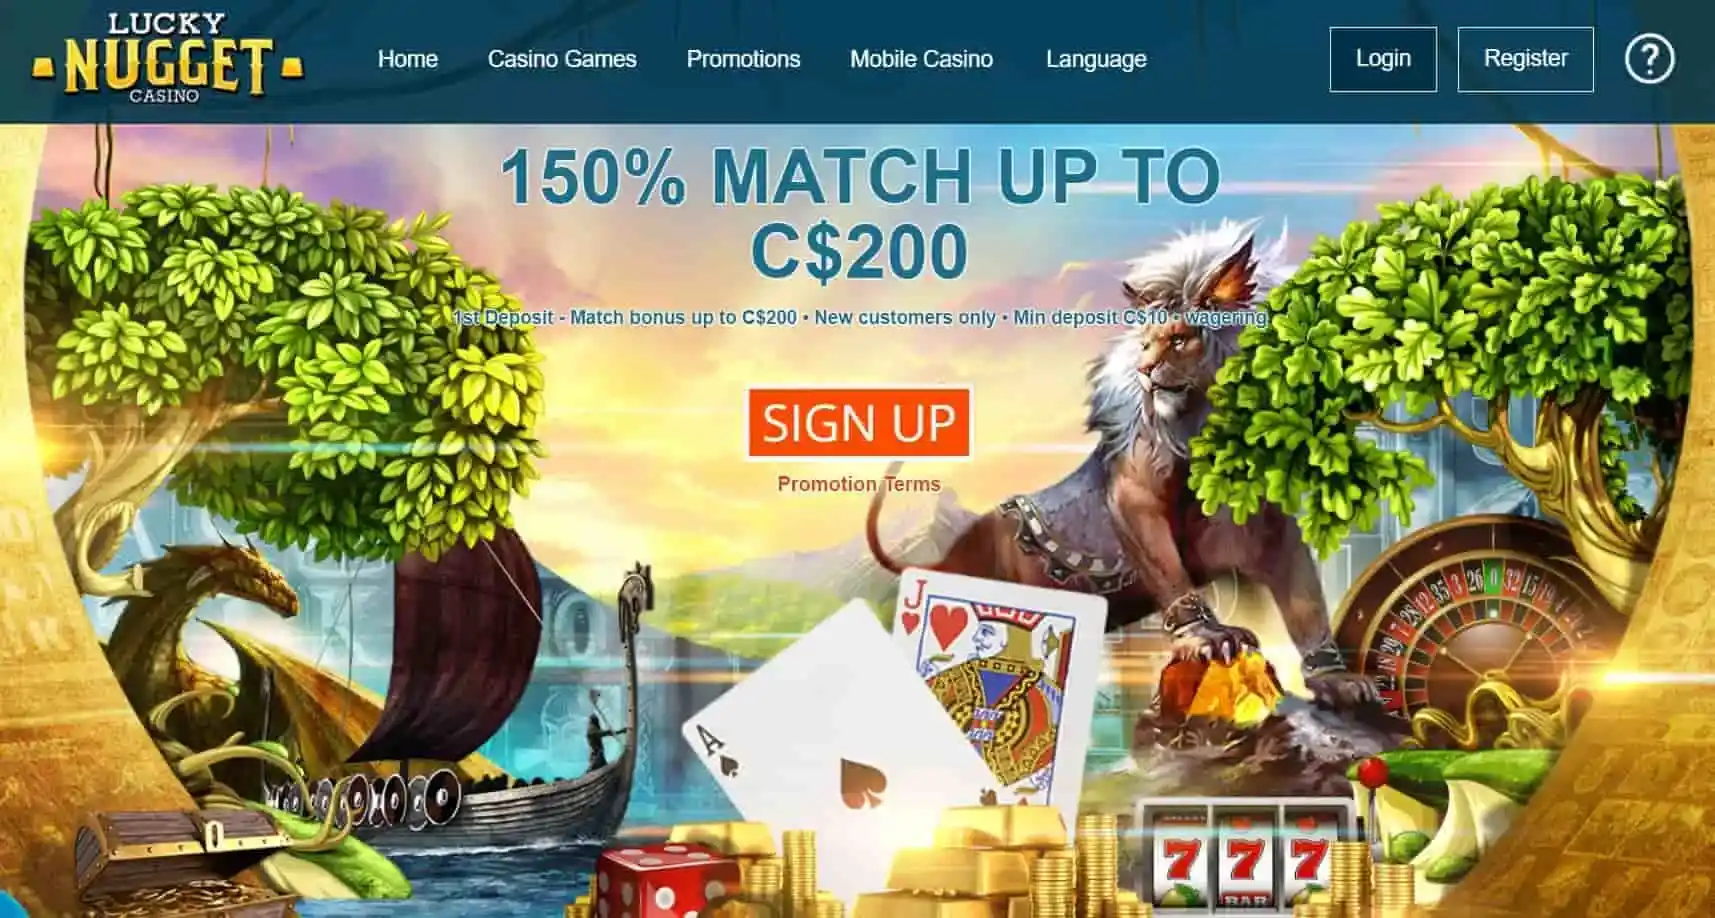 Lucky Nugget Casino main page